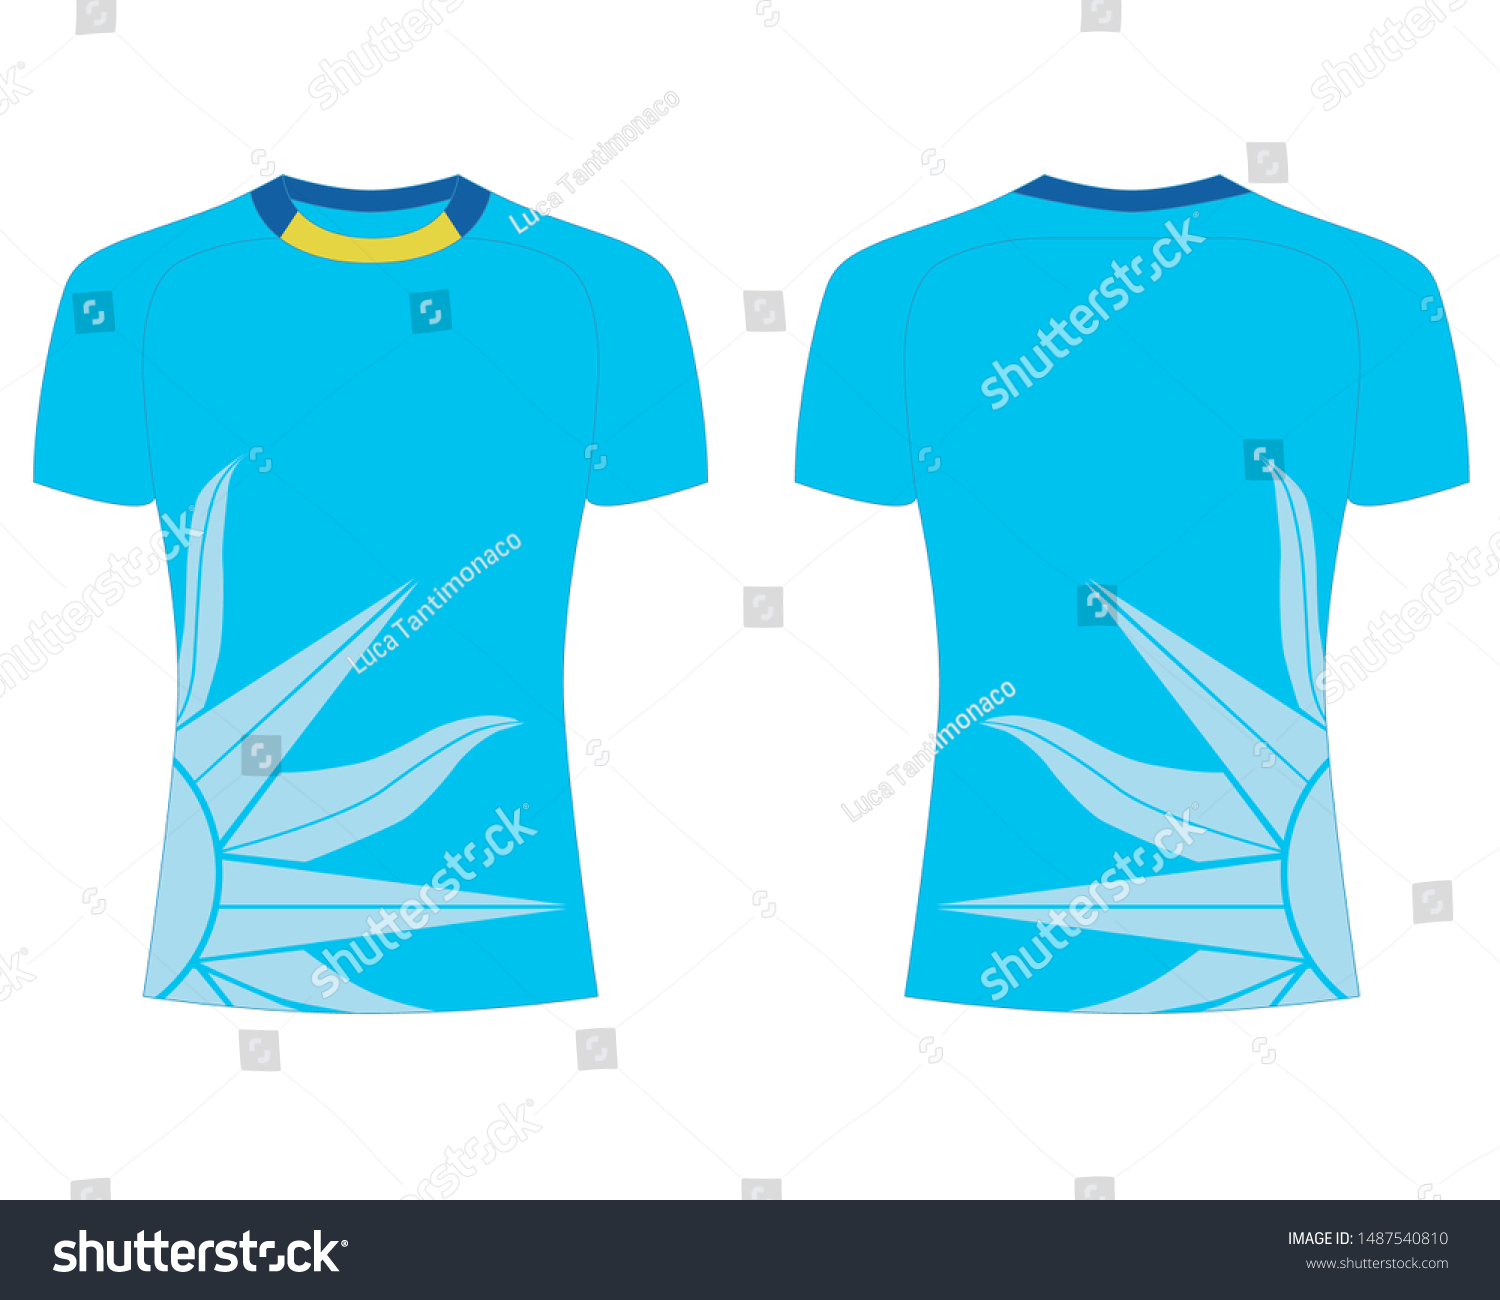 Download Tshirt Sport Design Template Rugby Jersey Stock Vector Royalty Free 1487540810